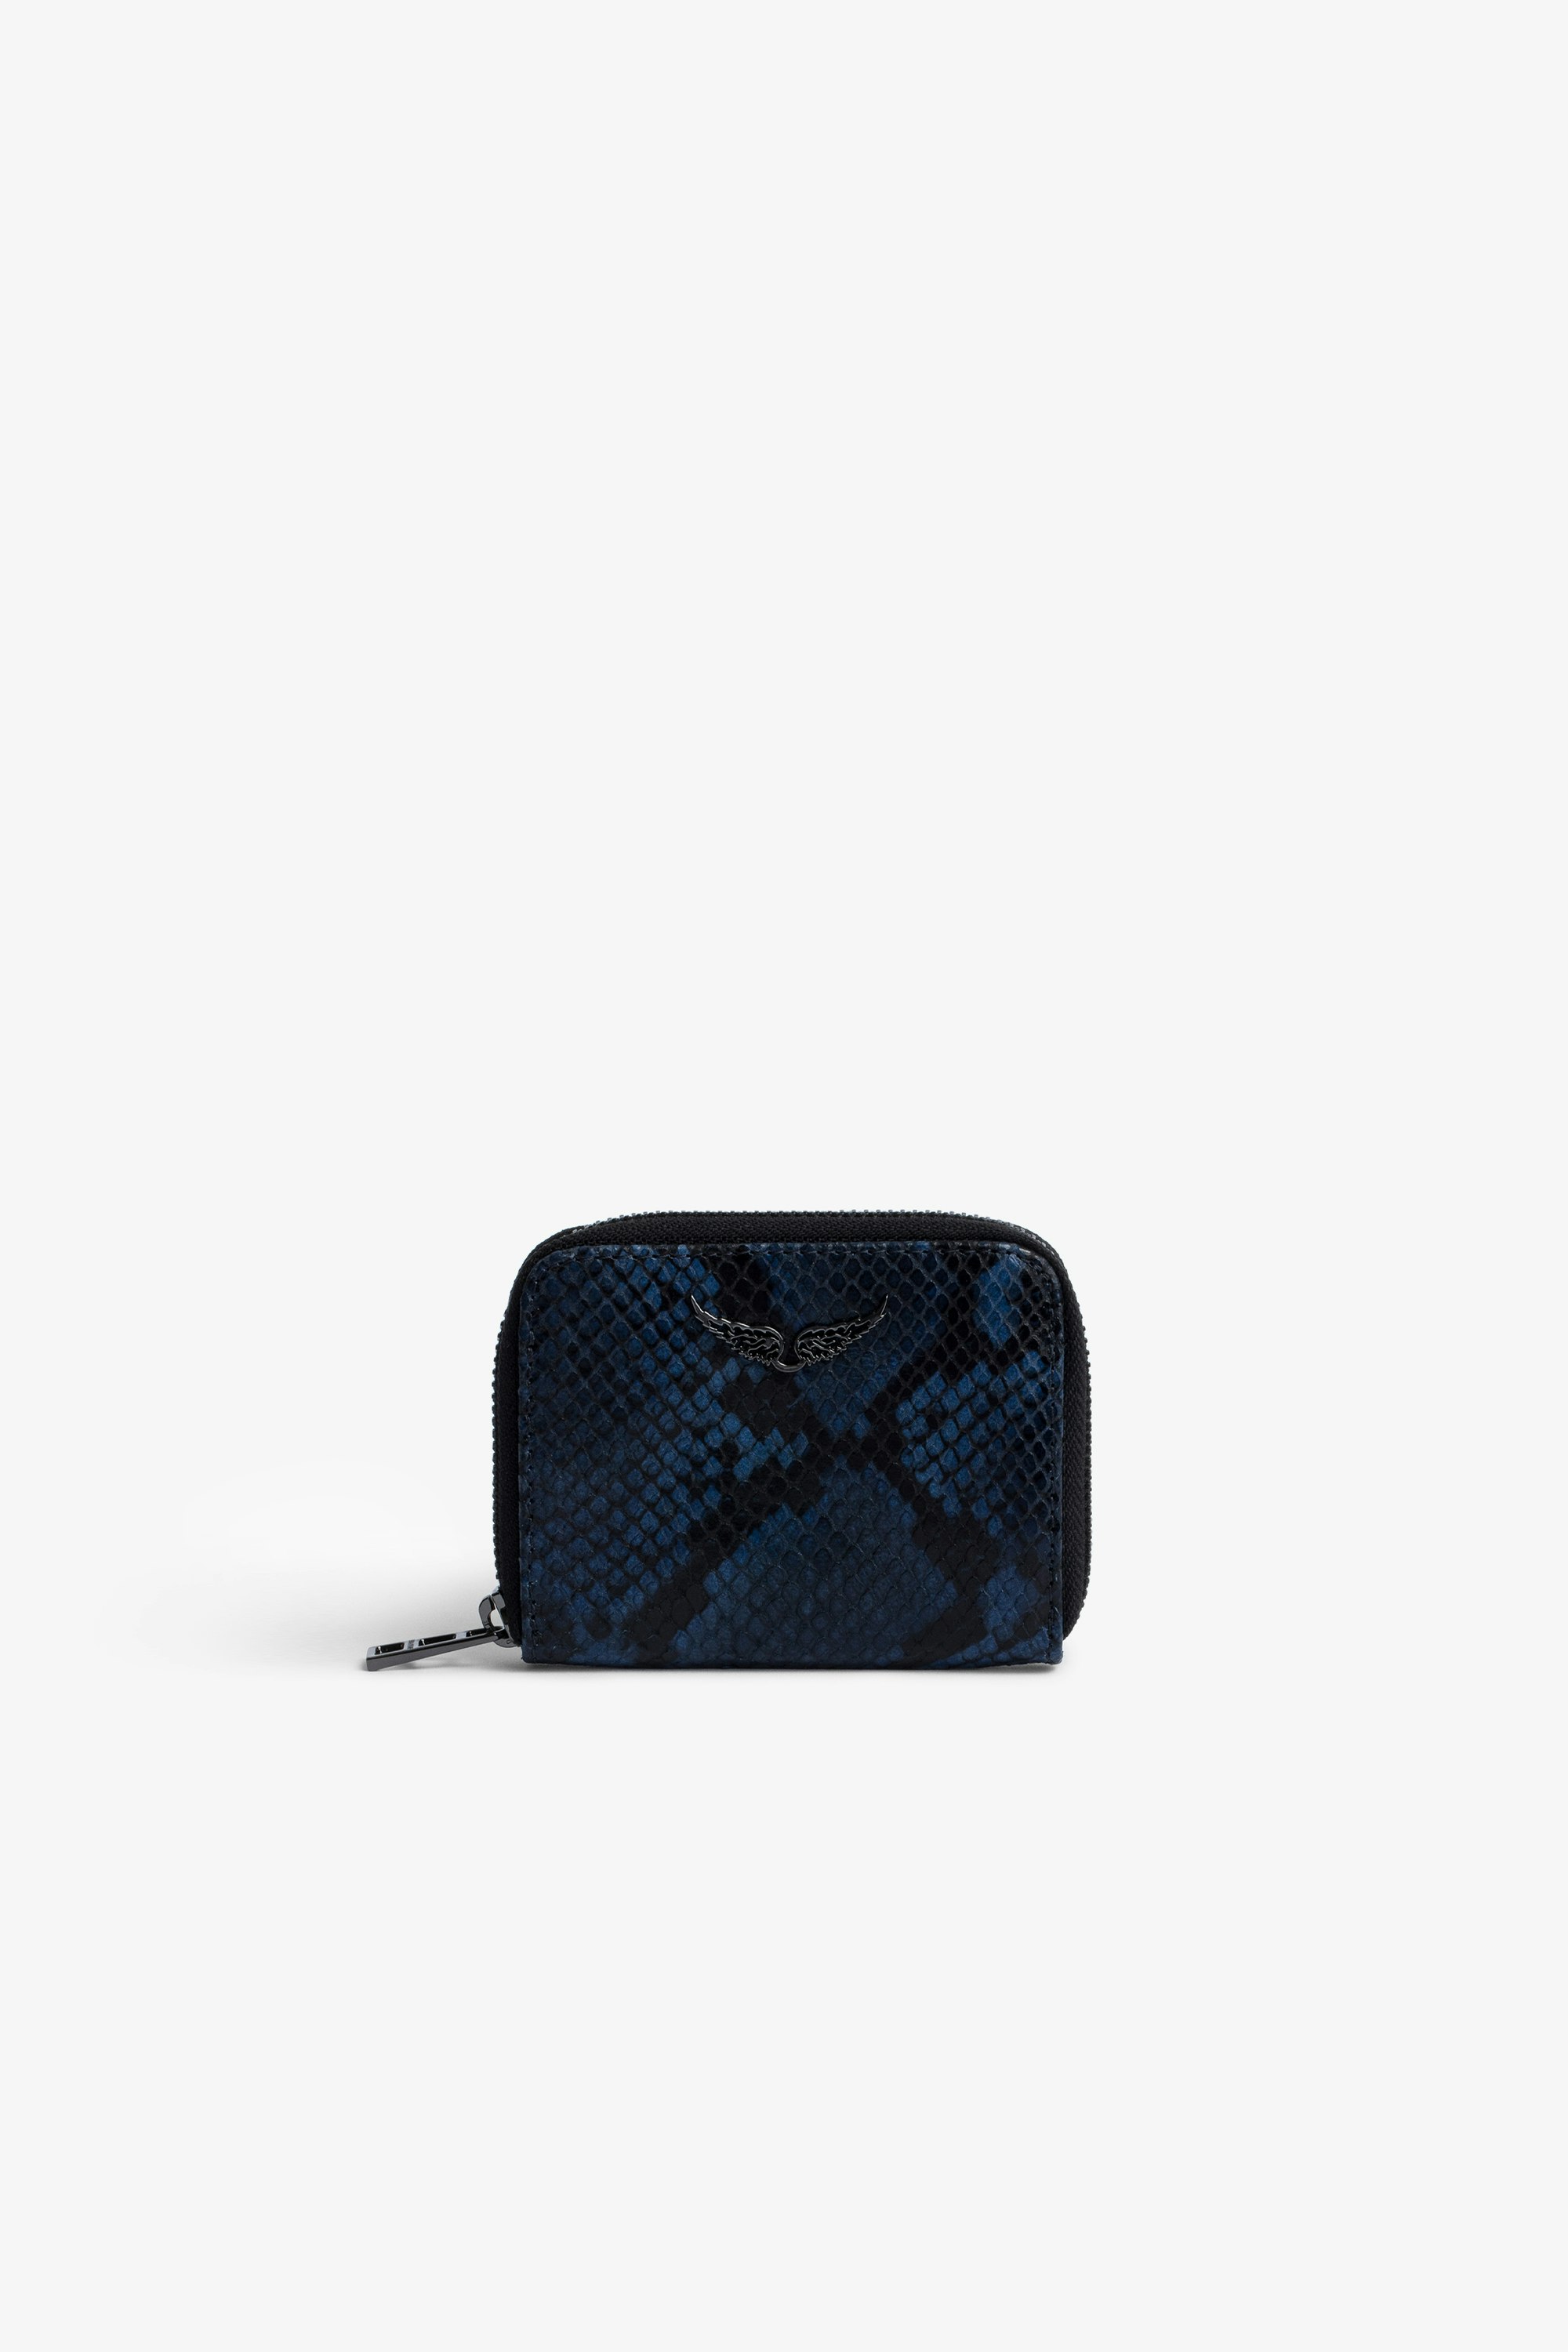 Mini ZV Coin Purse Women’s black and blue python-effect leather coin purse